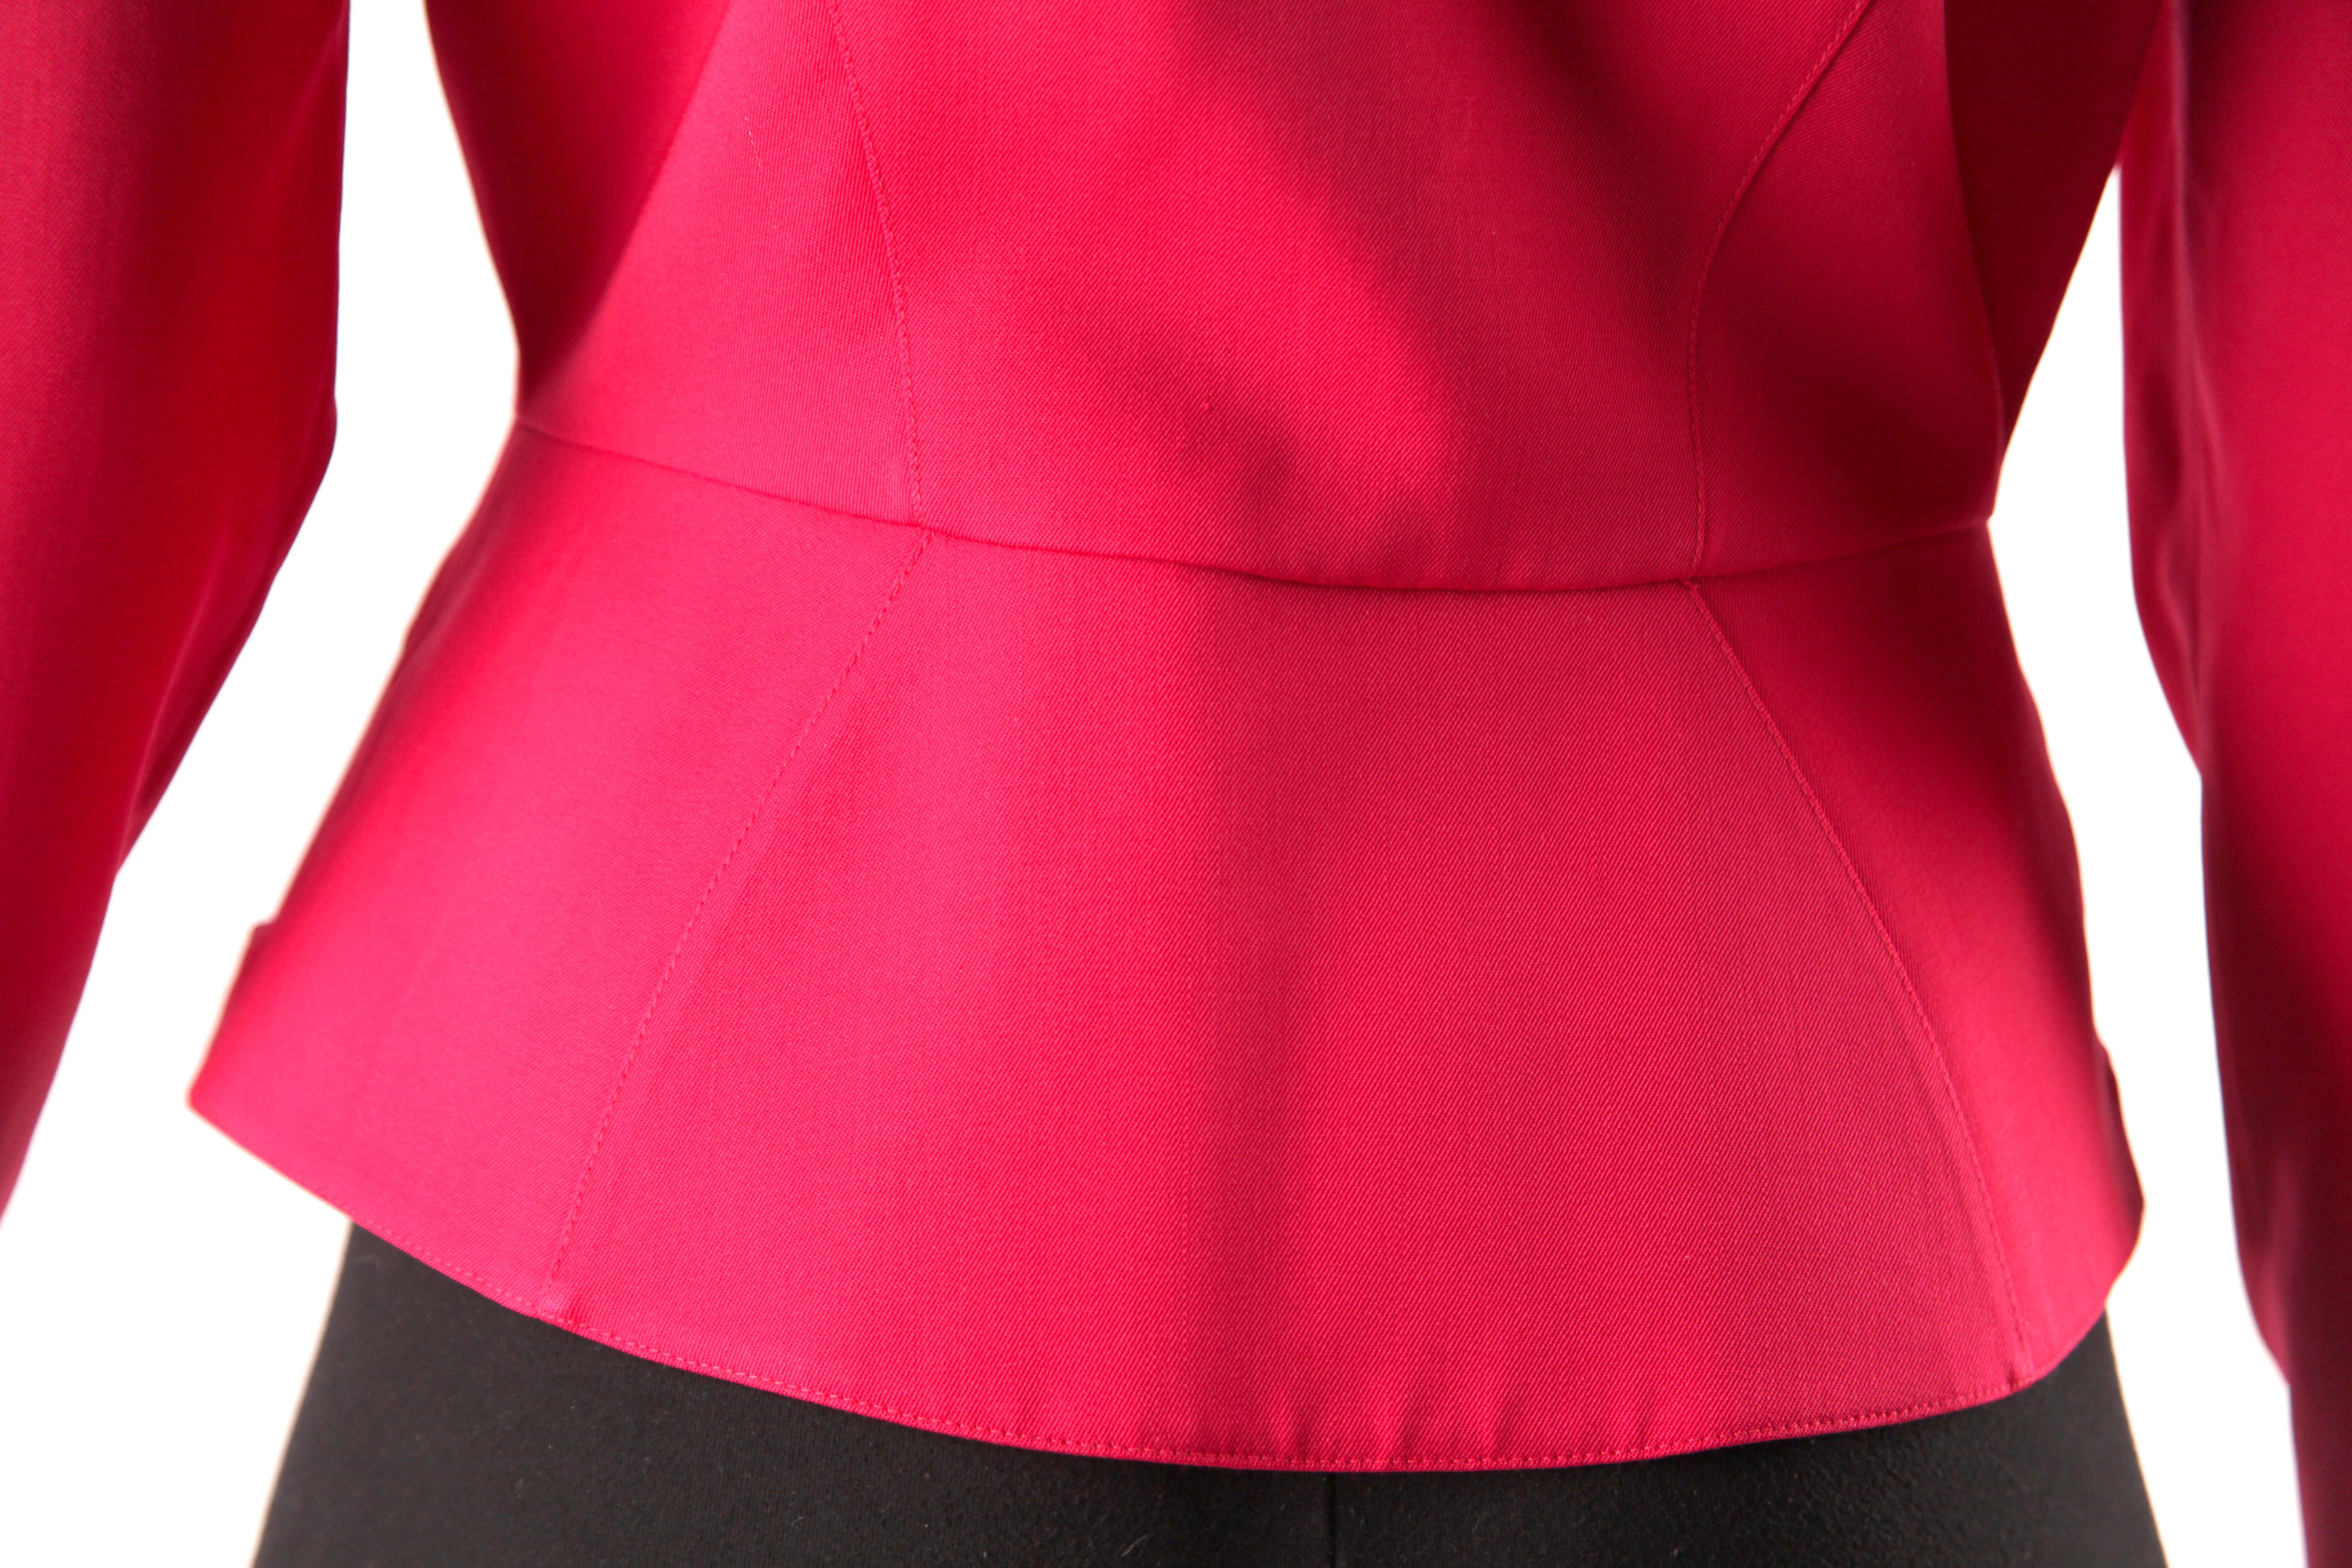 Thierry Mugler collectable intense “red-pink” hourglass jacket, circa 1980s 1